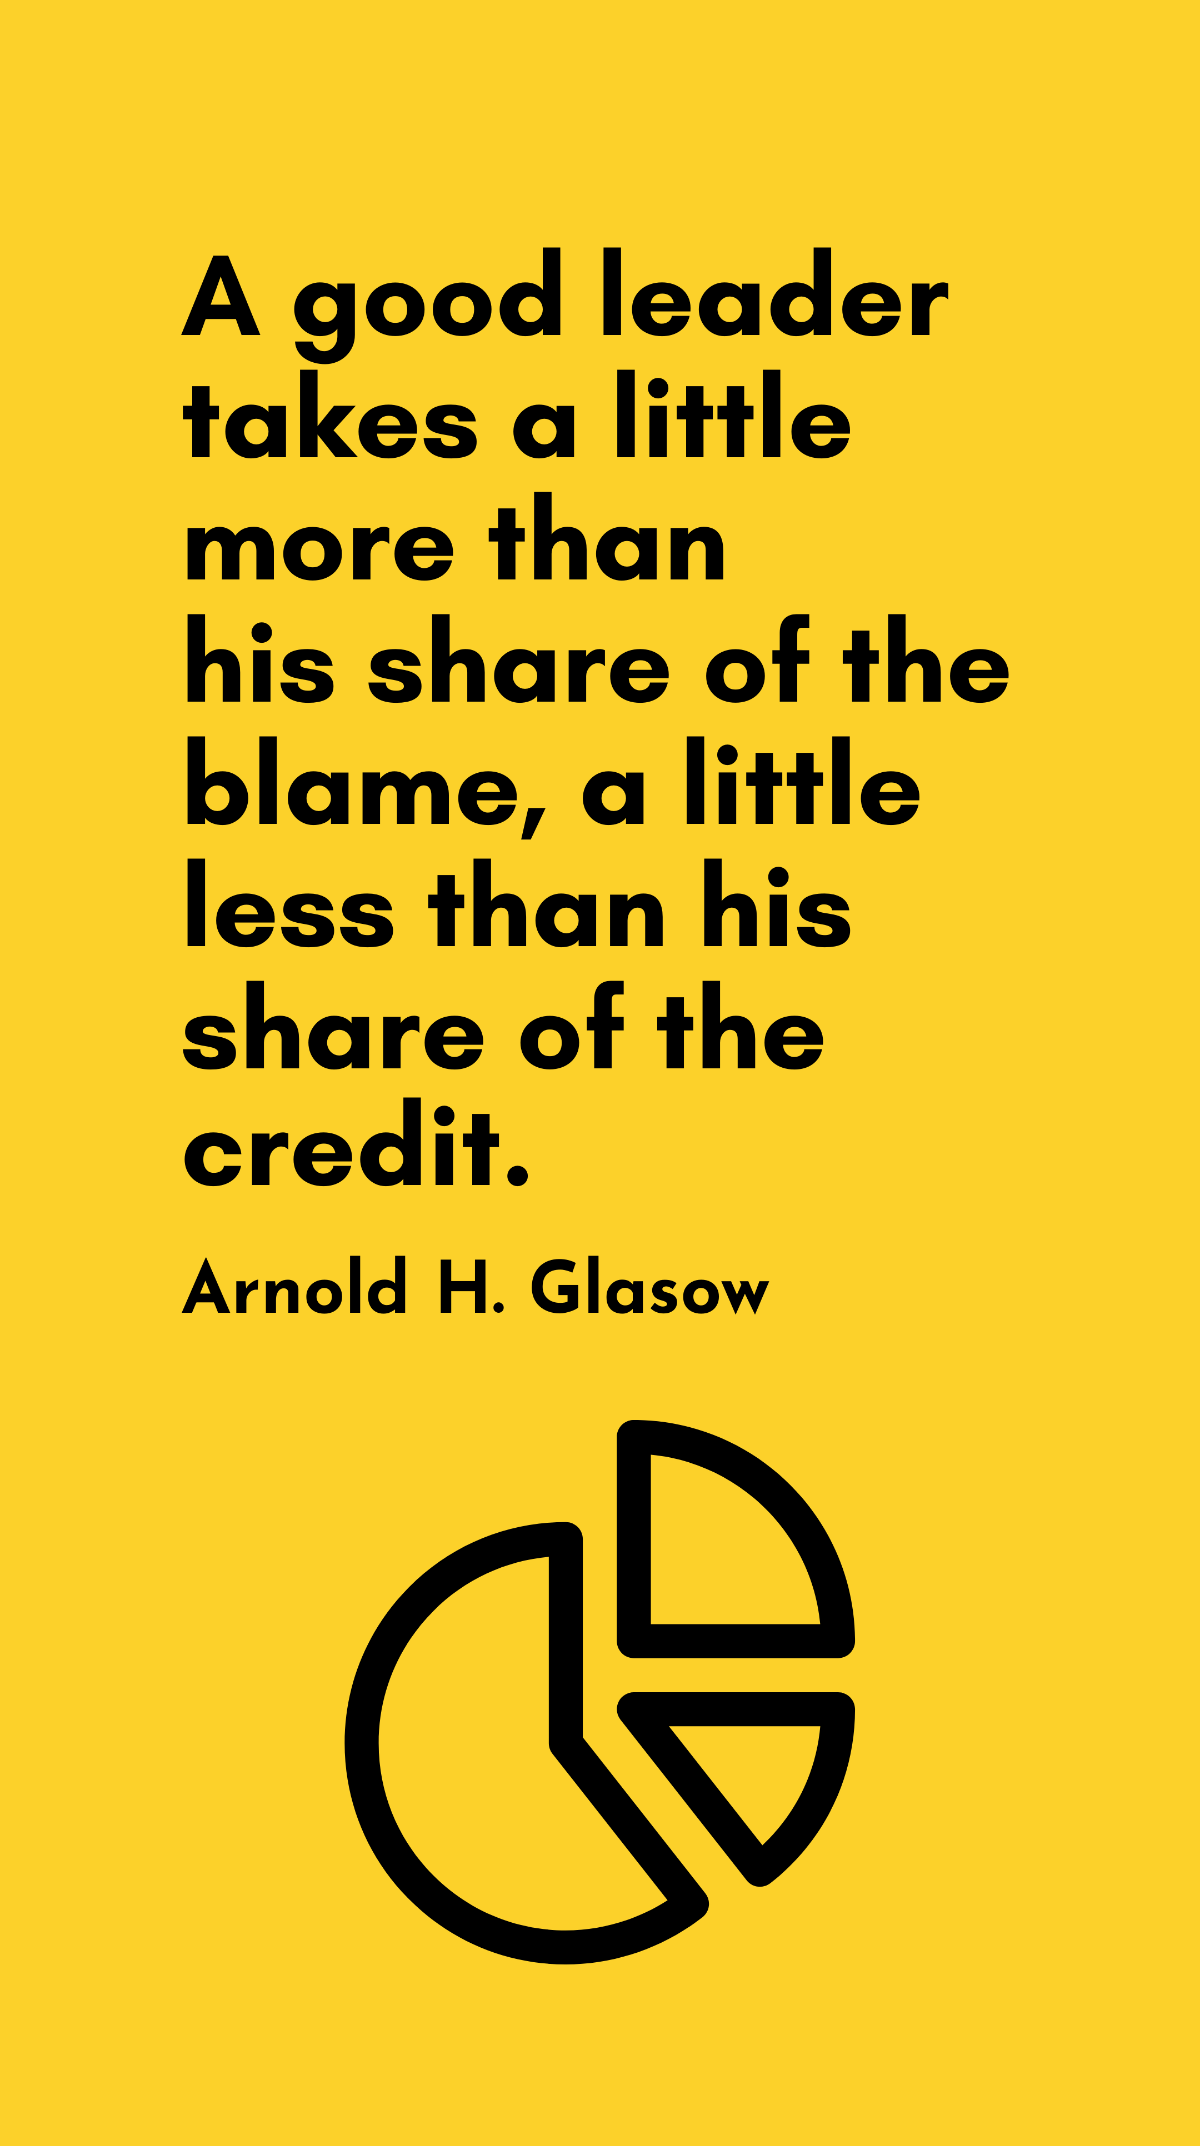 Arnold H. Glasow - A good leader takes a little more than his share of the blame, a little less than his share of the credit. Template